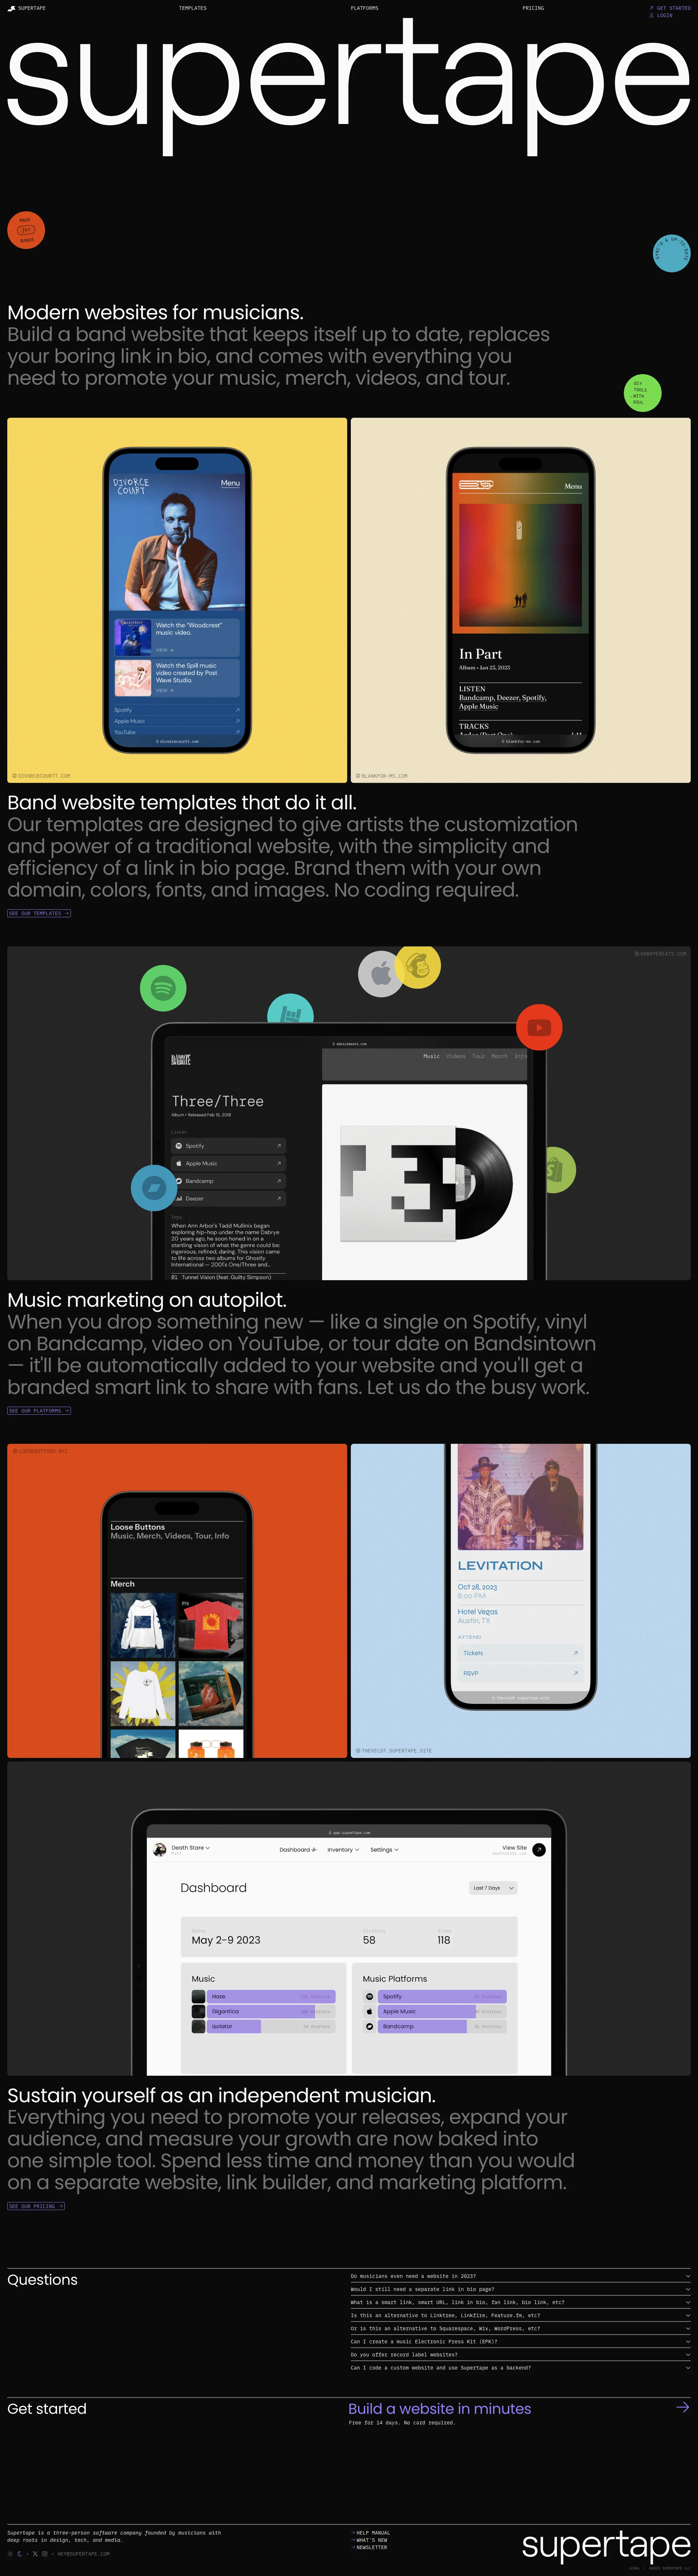 Supertape Landing Page Example: Modern websites for musicians. Build a band website that keeps itself up to date, replaces your boring link in bio, and comes with everything you need to promote your music, merch, videos, and tour.